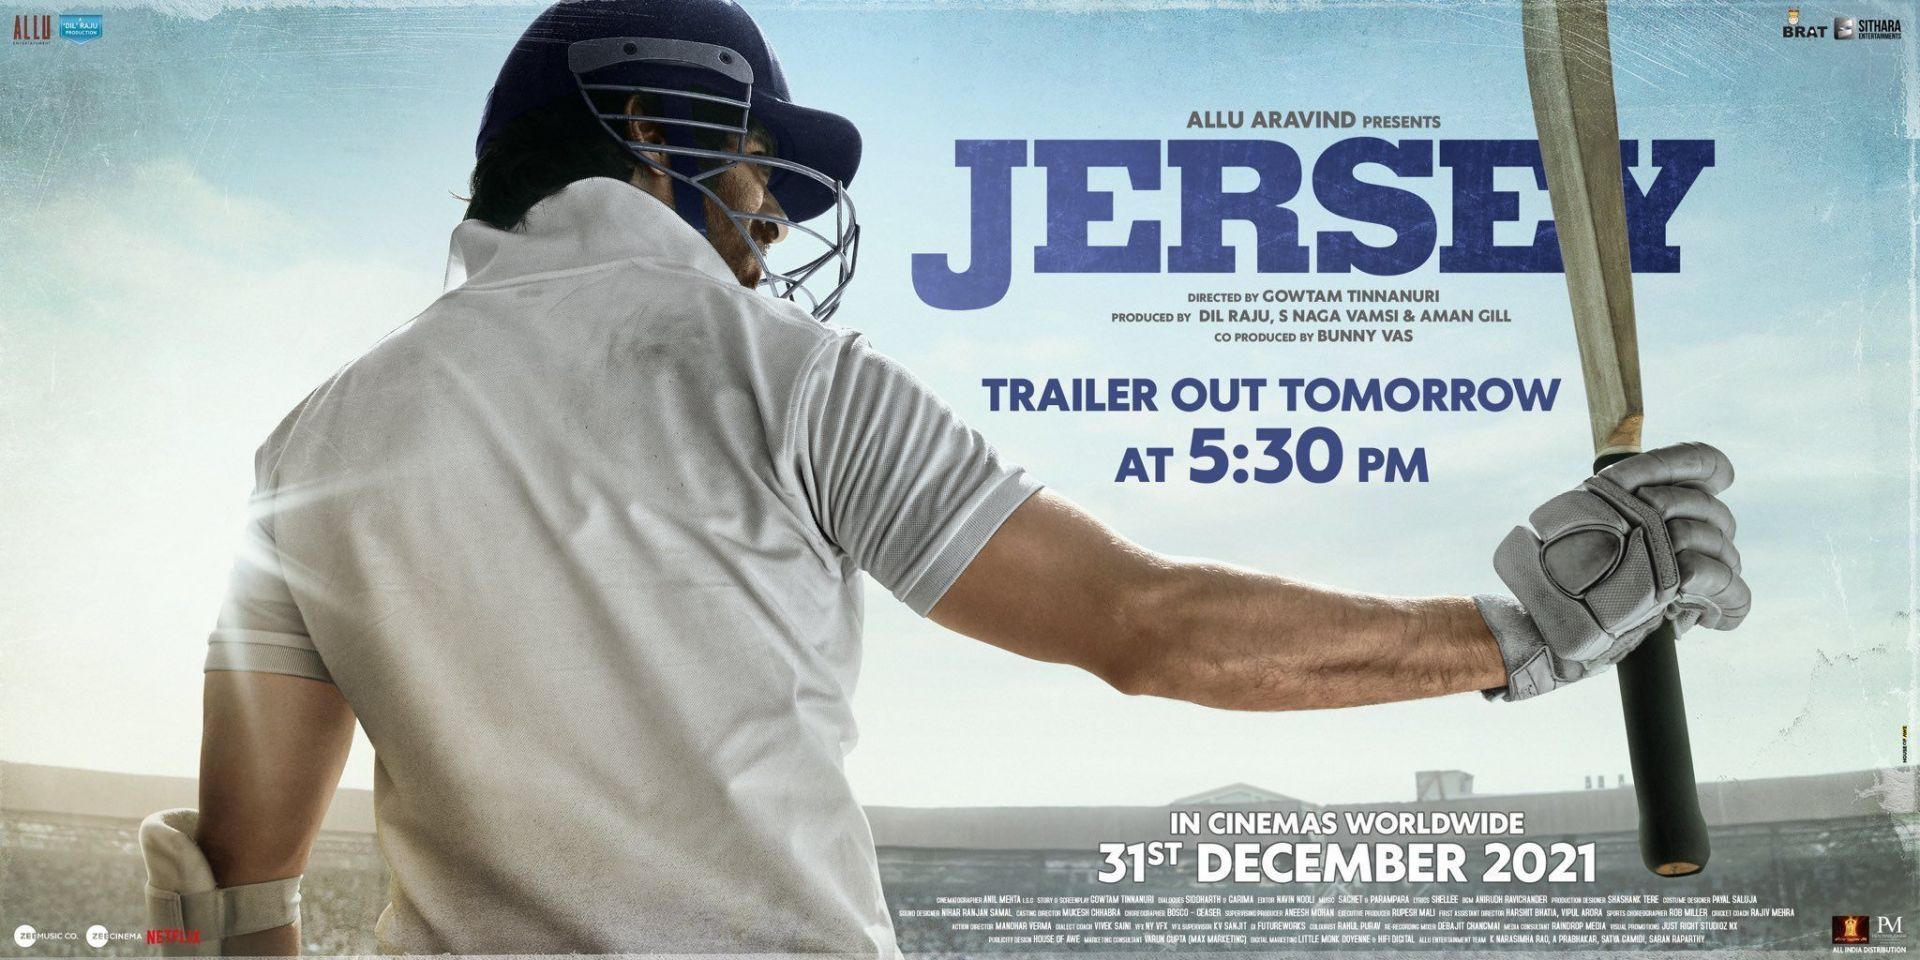 A poster of Shahid Kapoor-starrer Jersey.